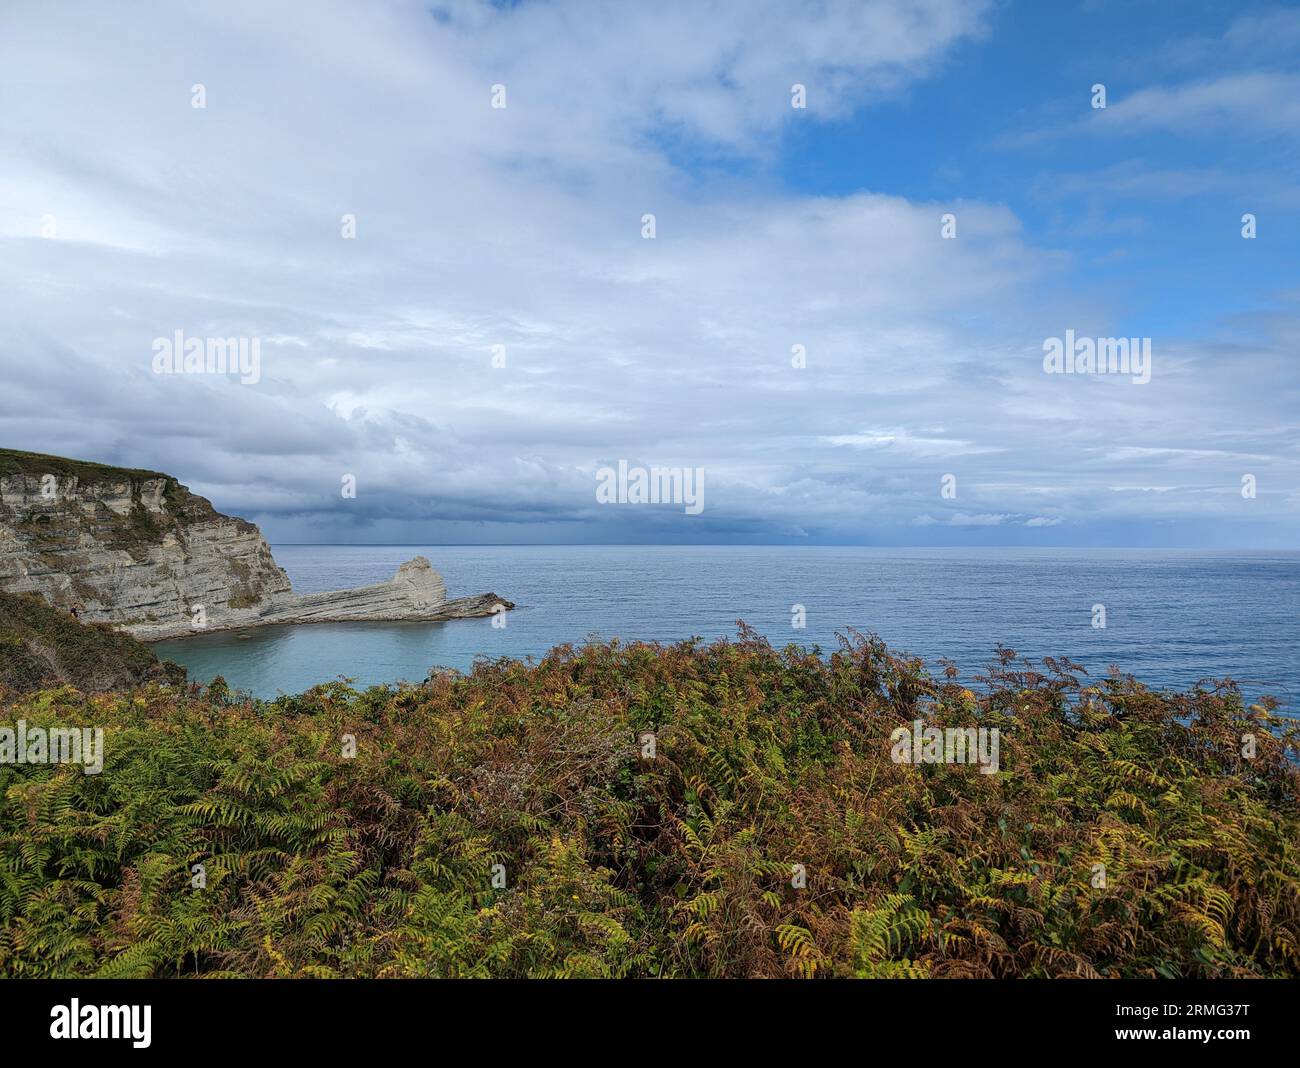 A landscape of the coast in Langreo on a cloudy day, Cantabria Stock Photo